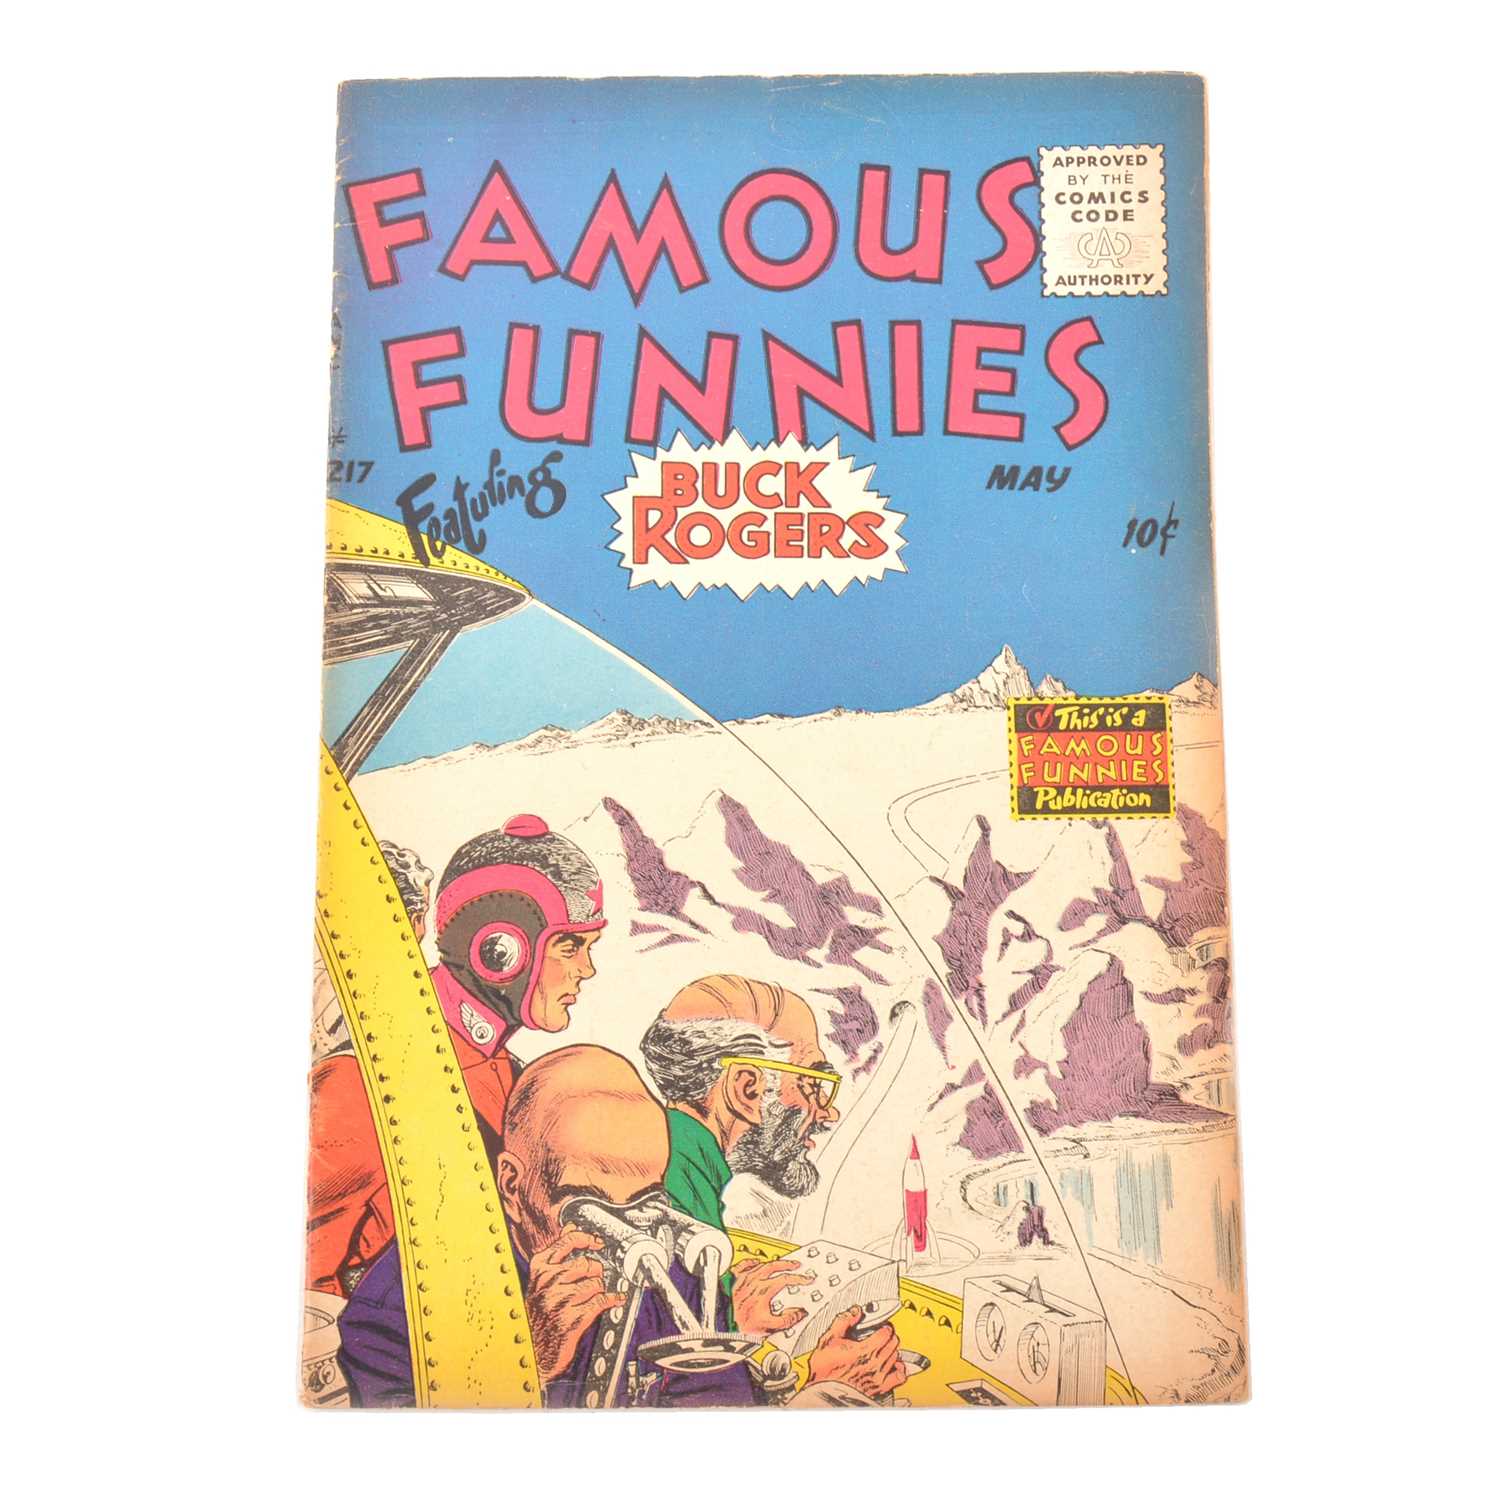 Lot 26 - Famous Funnies comic no.217, Buck Rogers cover